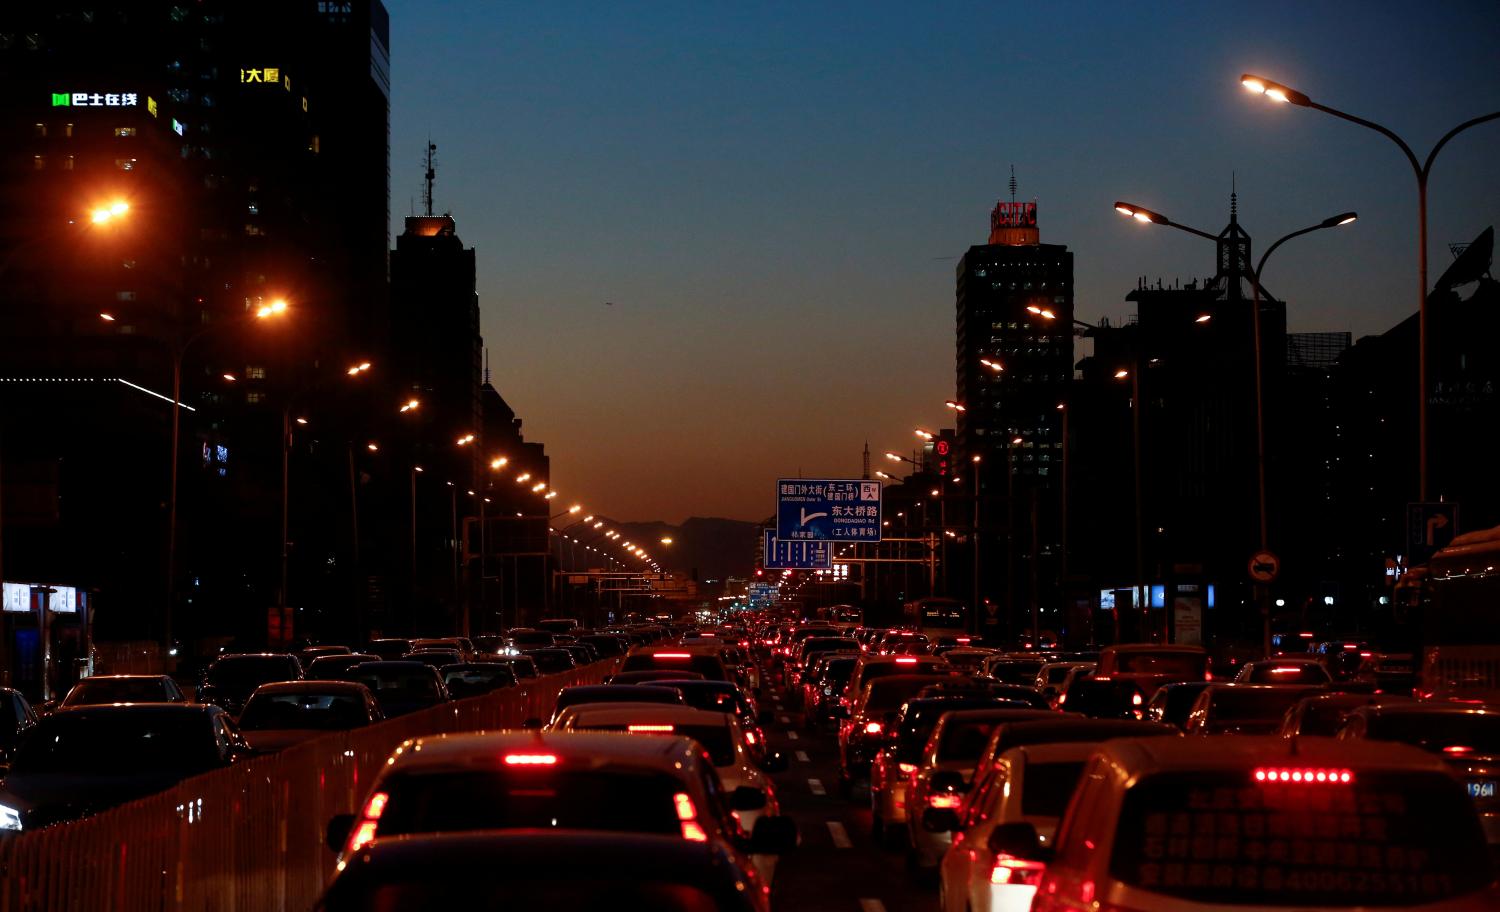 Cars stand bumper to bumper in the evening rush hour traffic jam in central Beijing, China